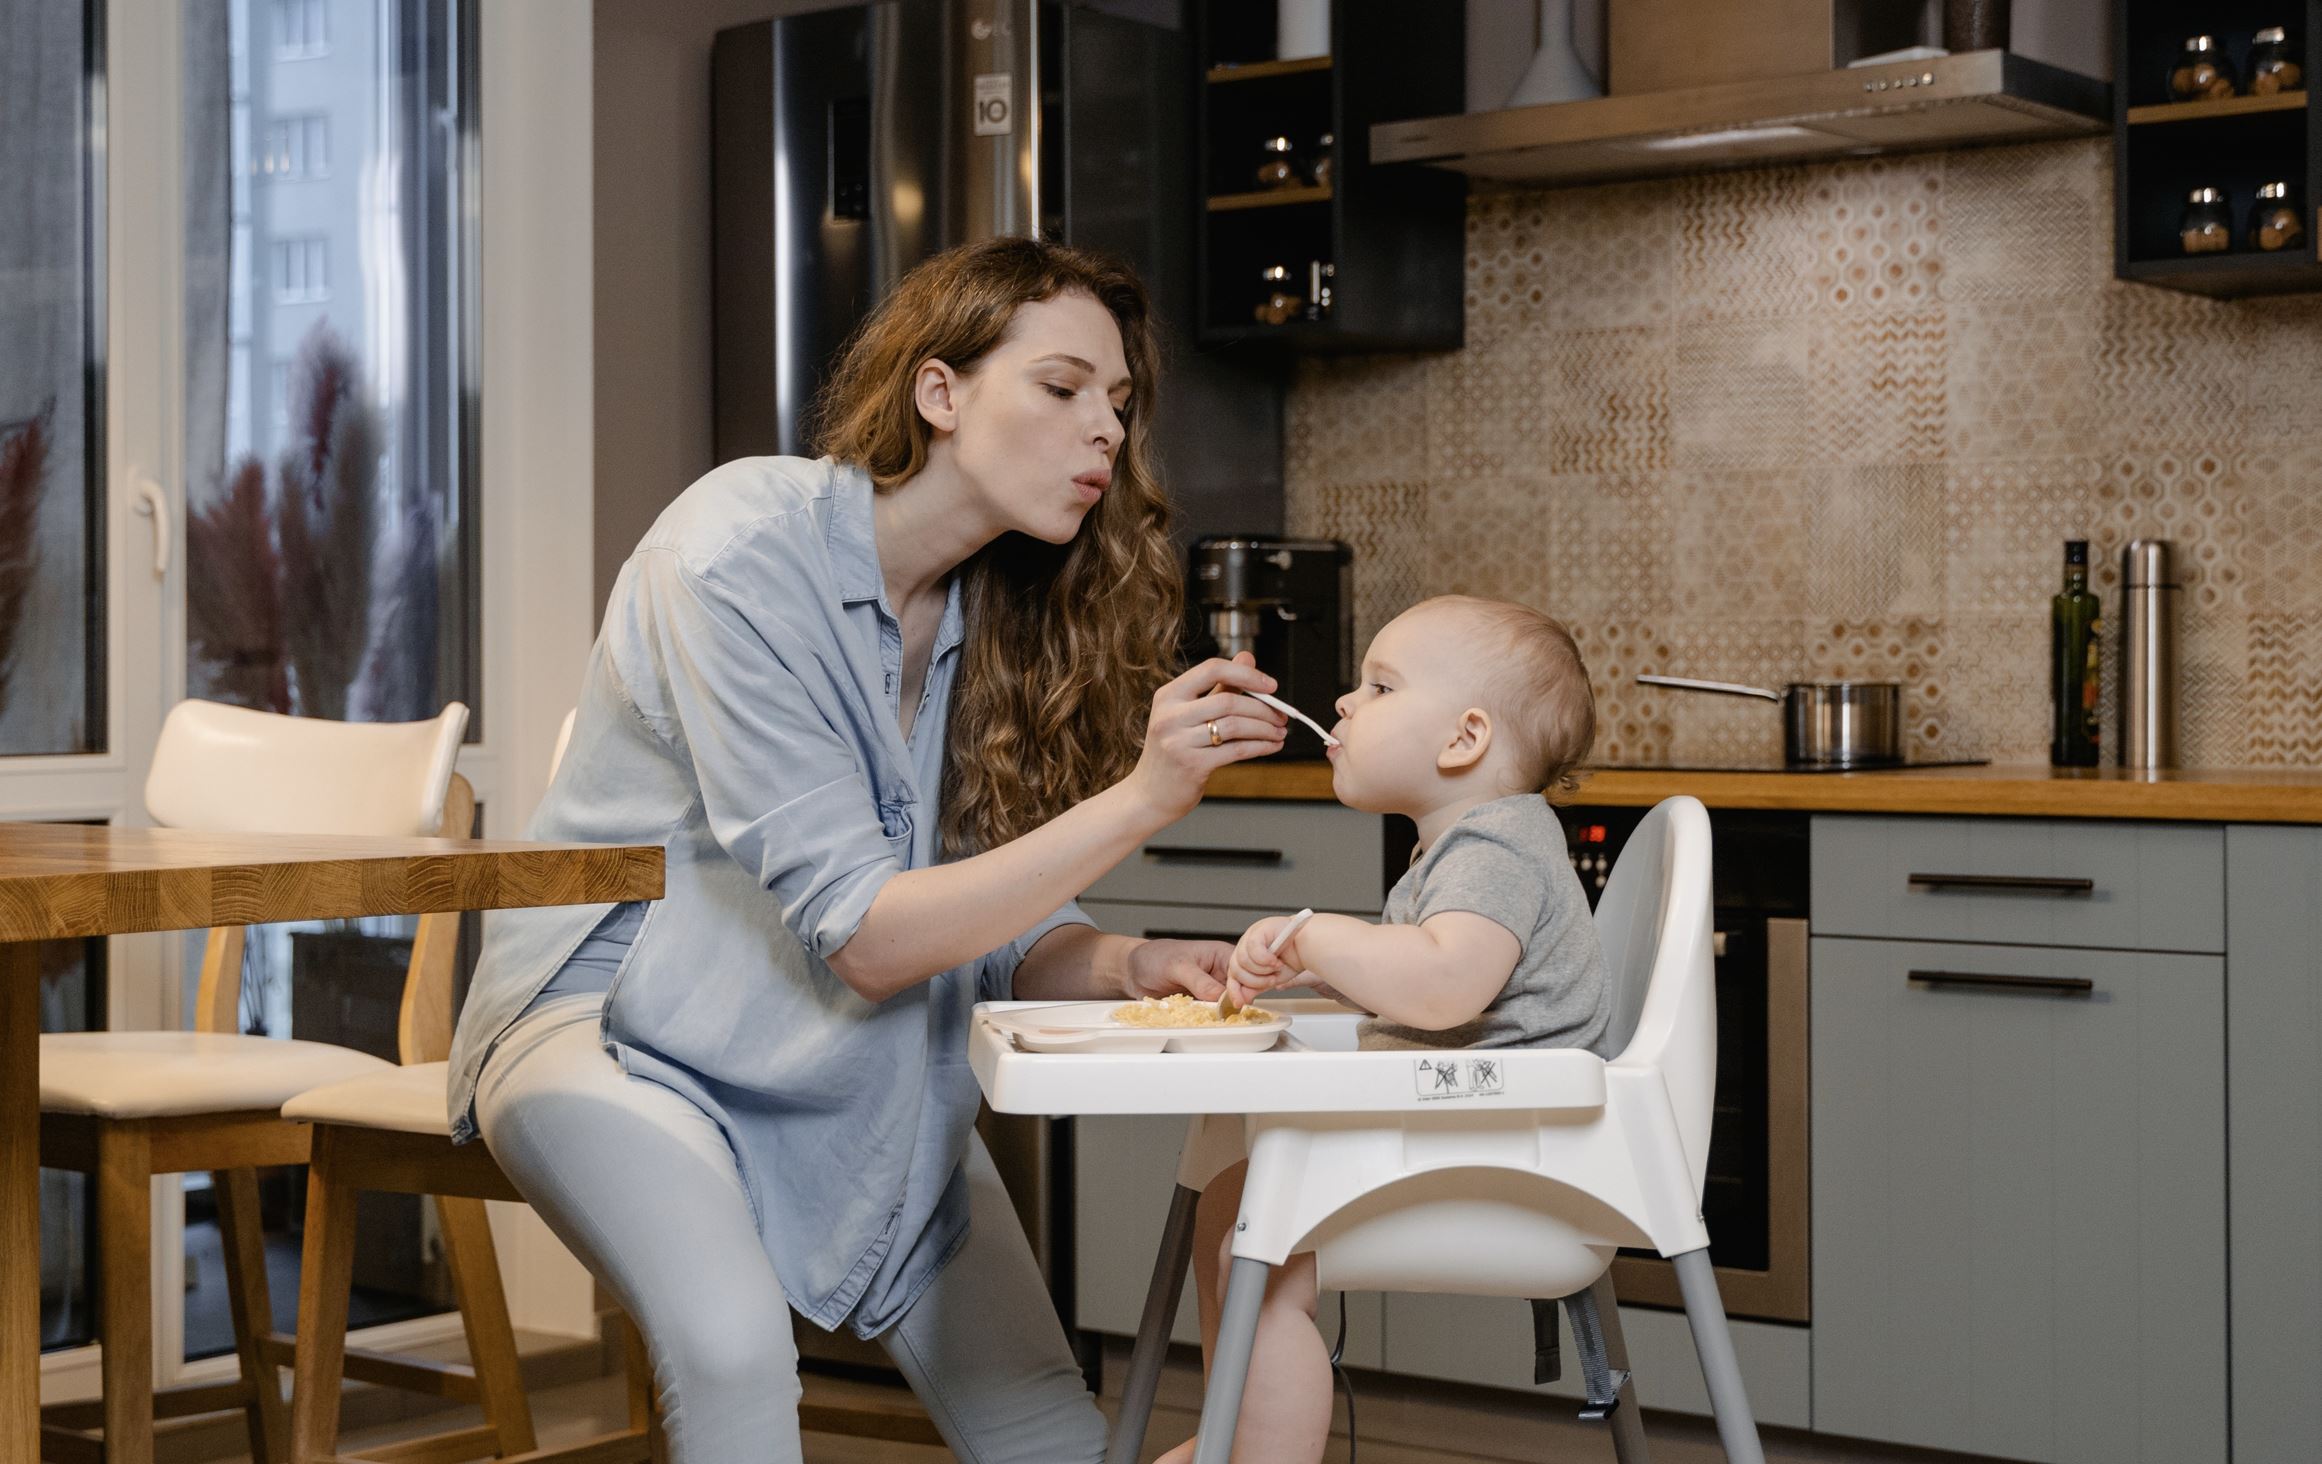  Paid parental leave policy is depicted with a mom feeds her toddler at home while on her maternity leave